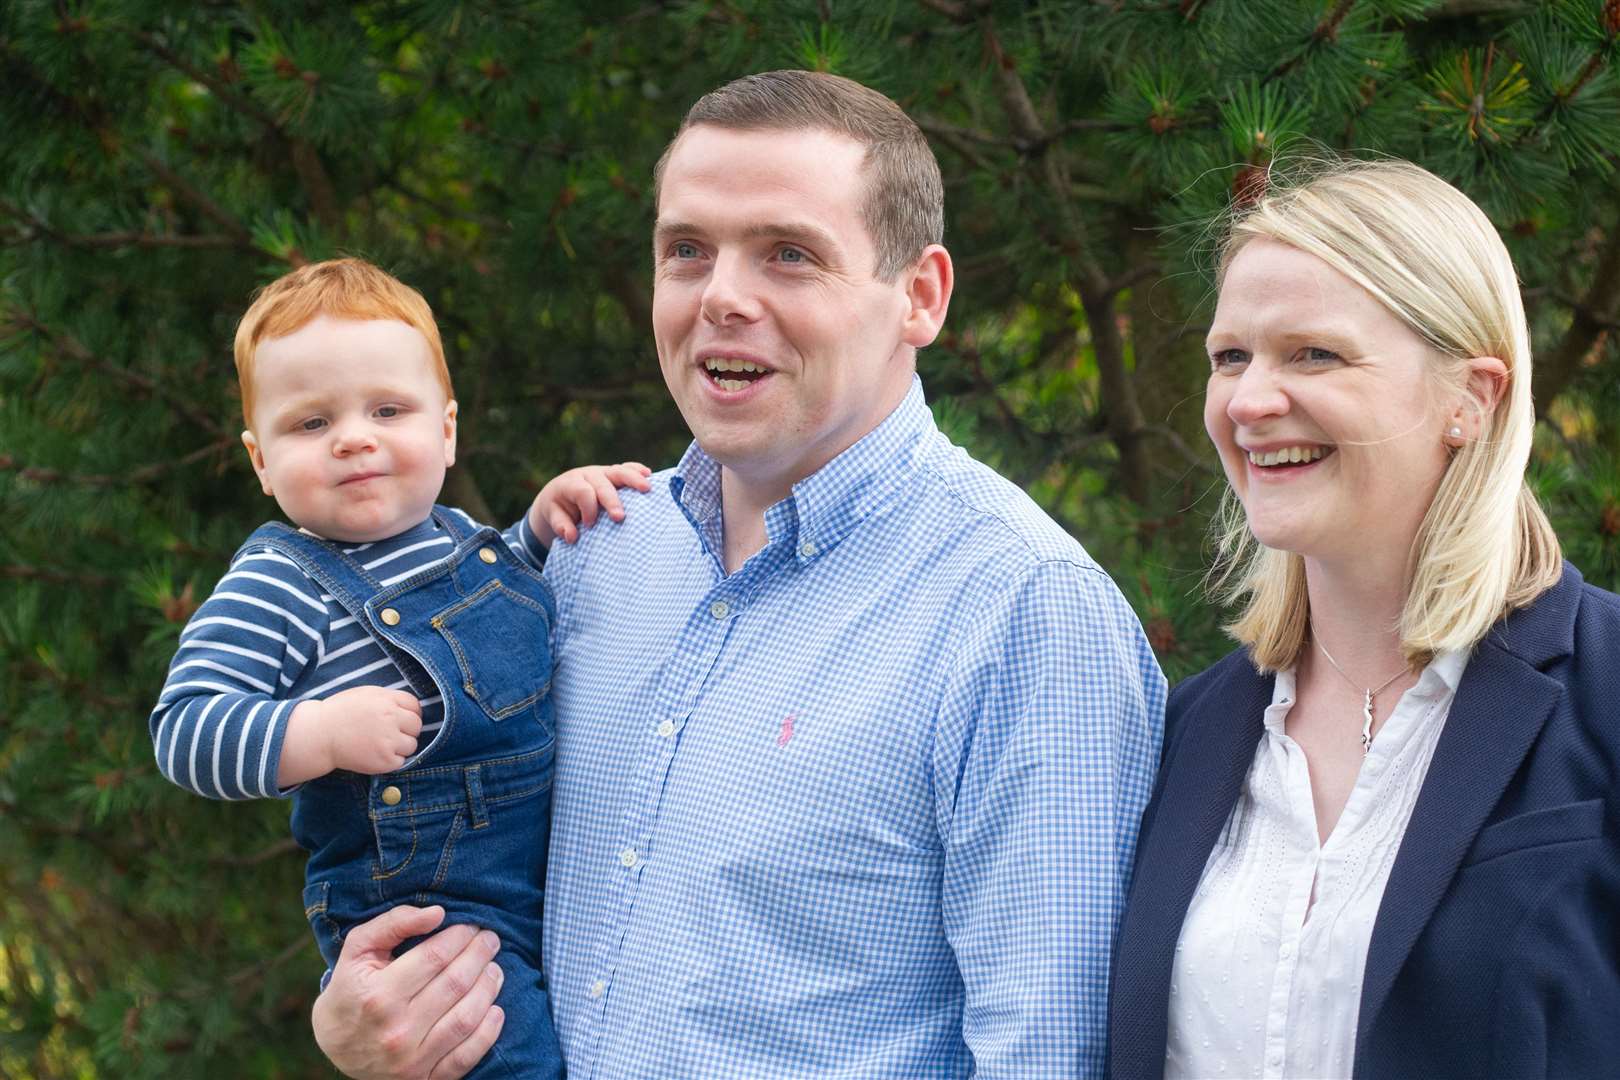 Douglas Ross celebrates his election as Scottish Conservative leader with wife Krystle and son Alistair. Picture: Daniel Forsyth